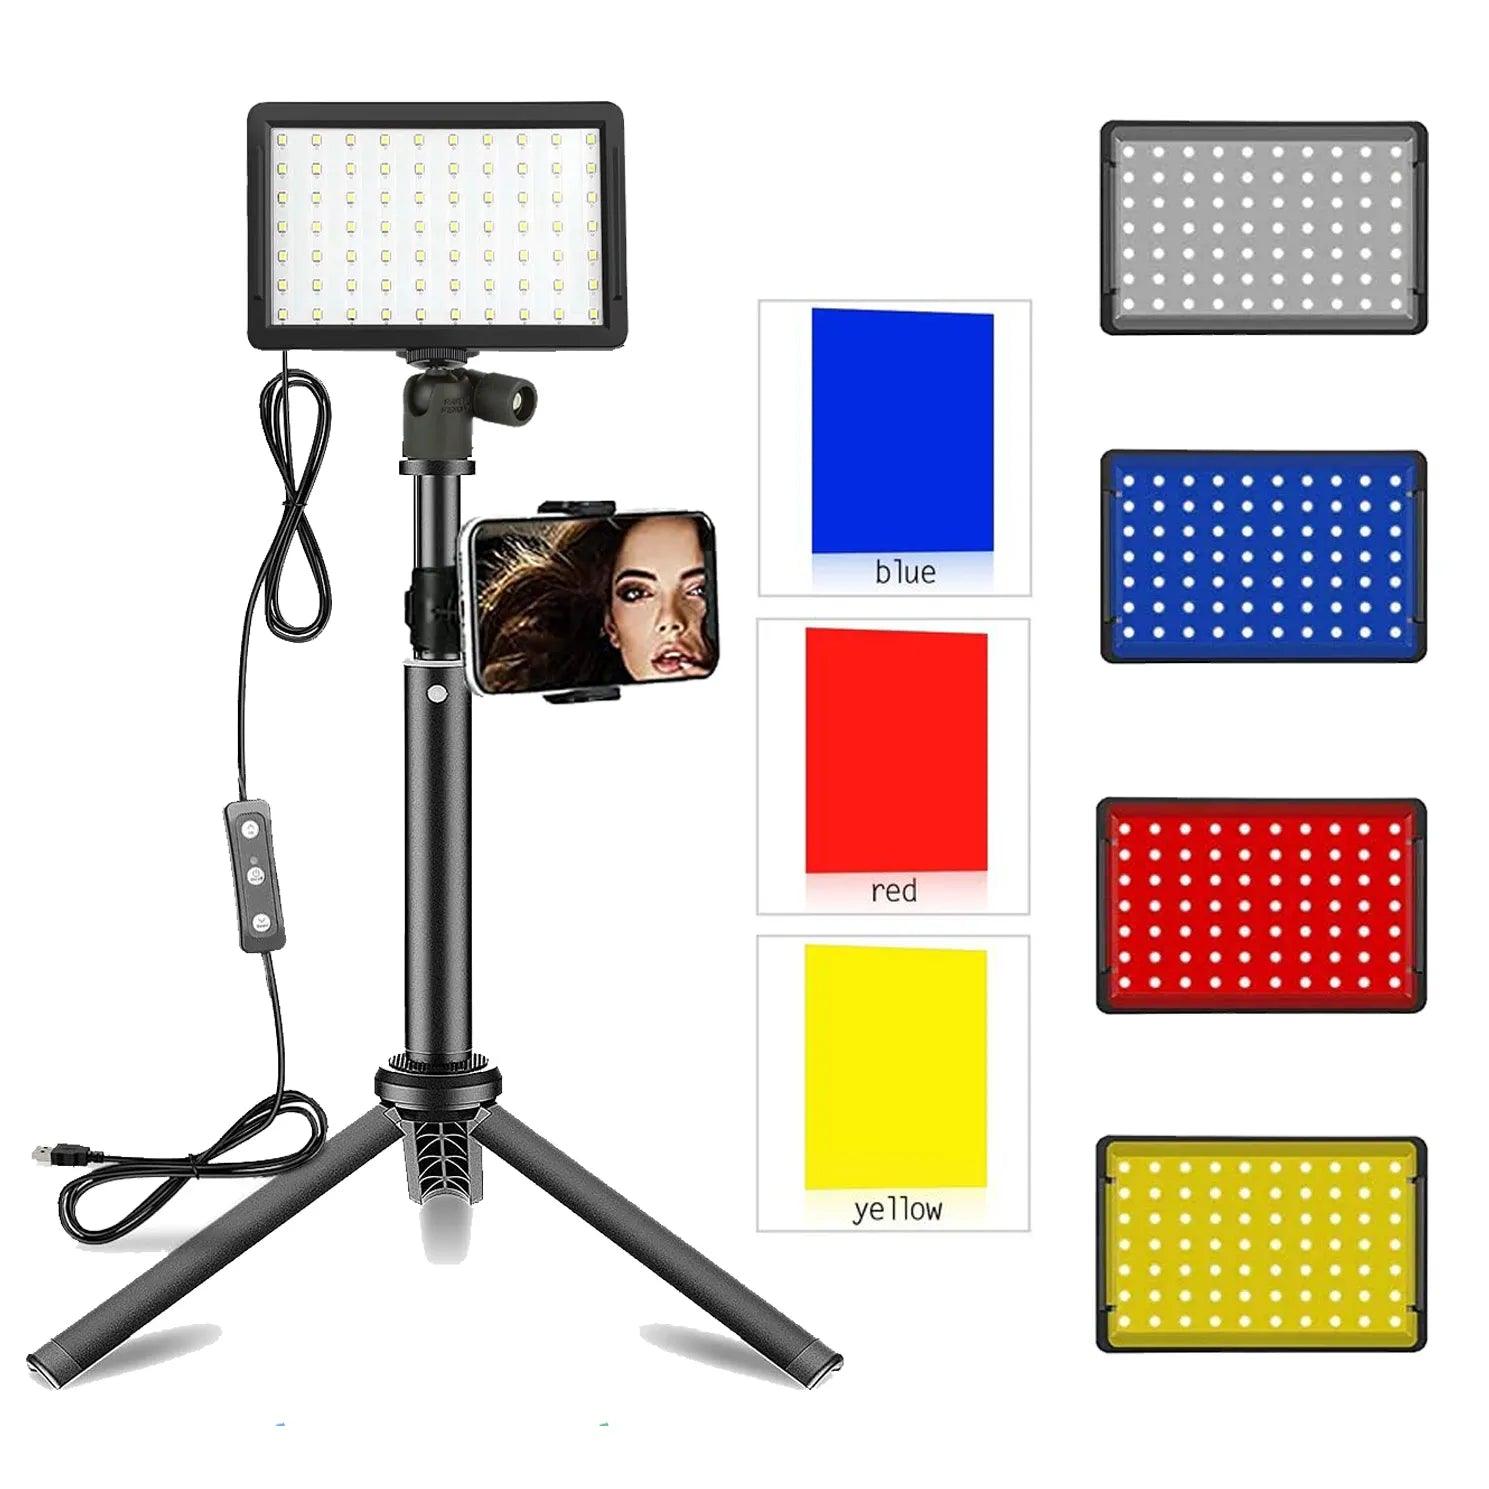 LED Studio Photography Video Light Panel Kit with Tripod Stand and RGB Filters - Adjustable Color Temperature & Brightness Control  ourlum.com   